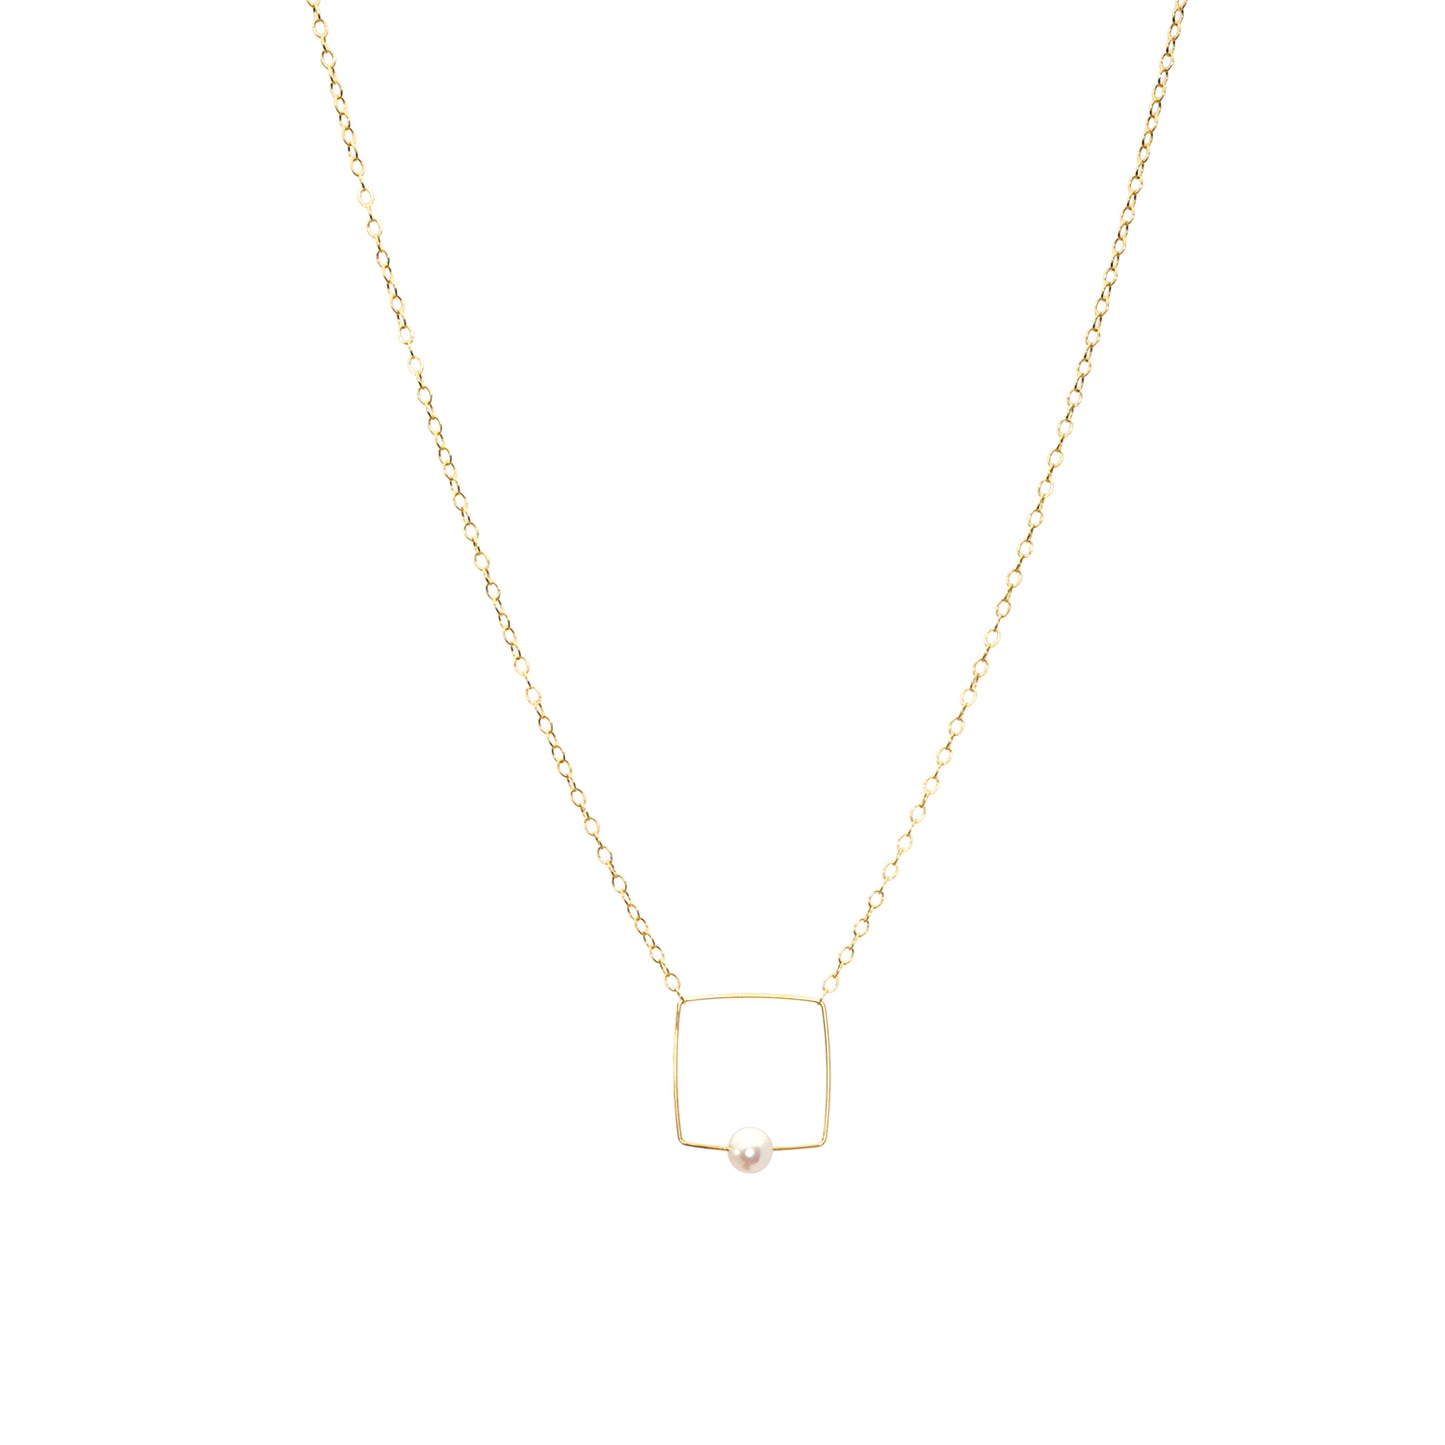 Small Square Pendant Necklace with Round Freshwater Pearl